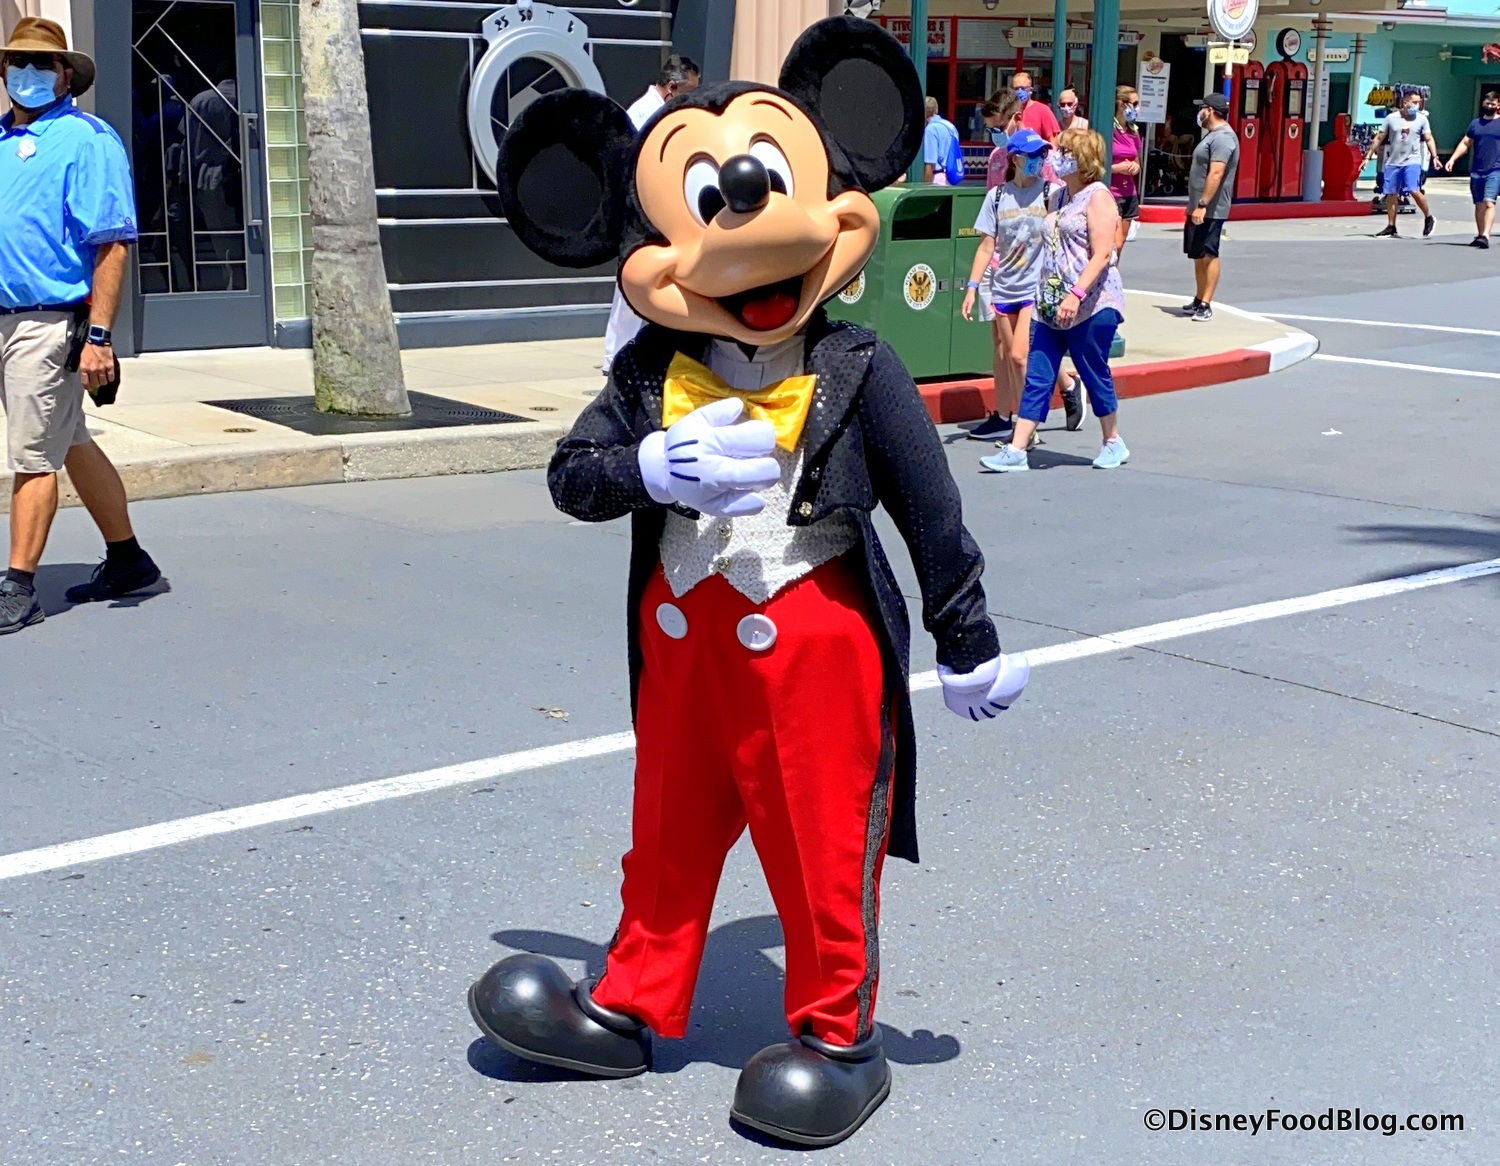 Mickey Mouse's history explained in 6 facts